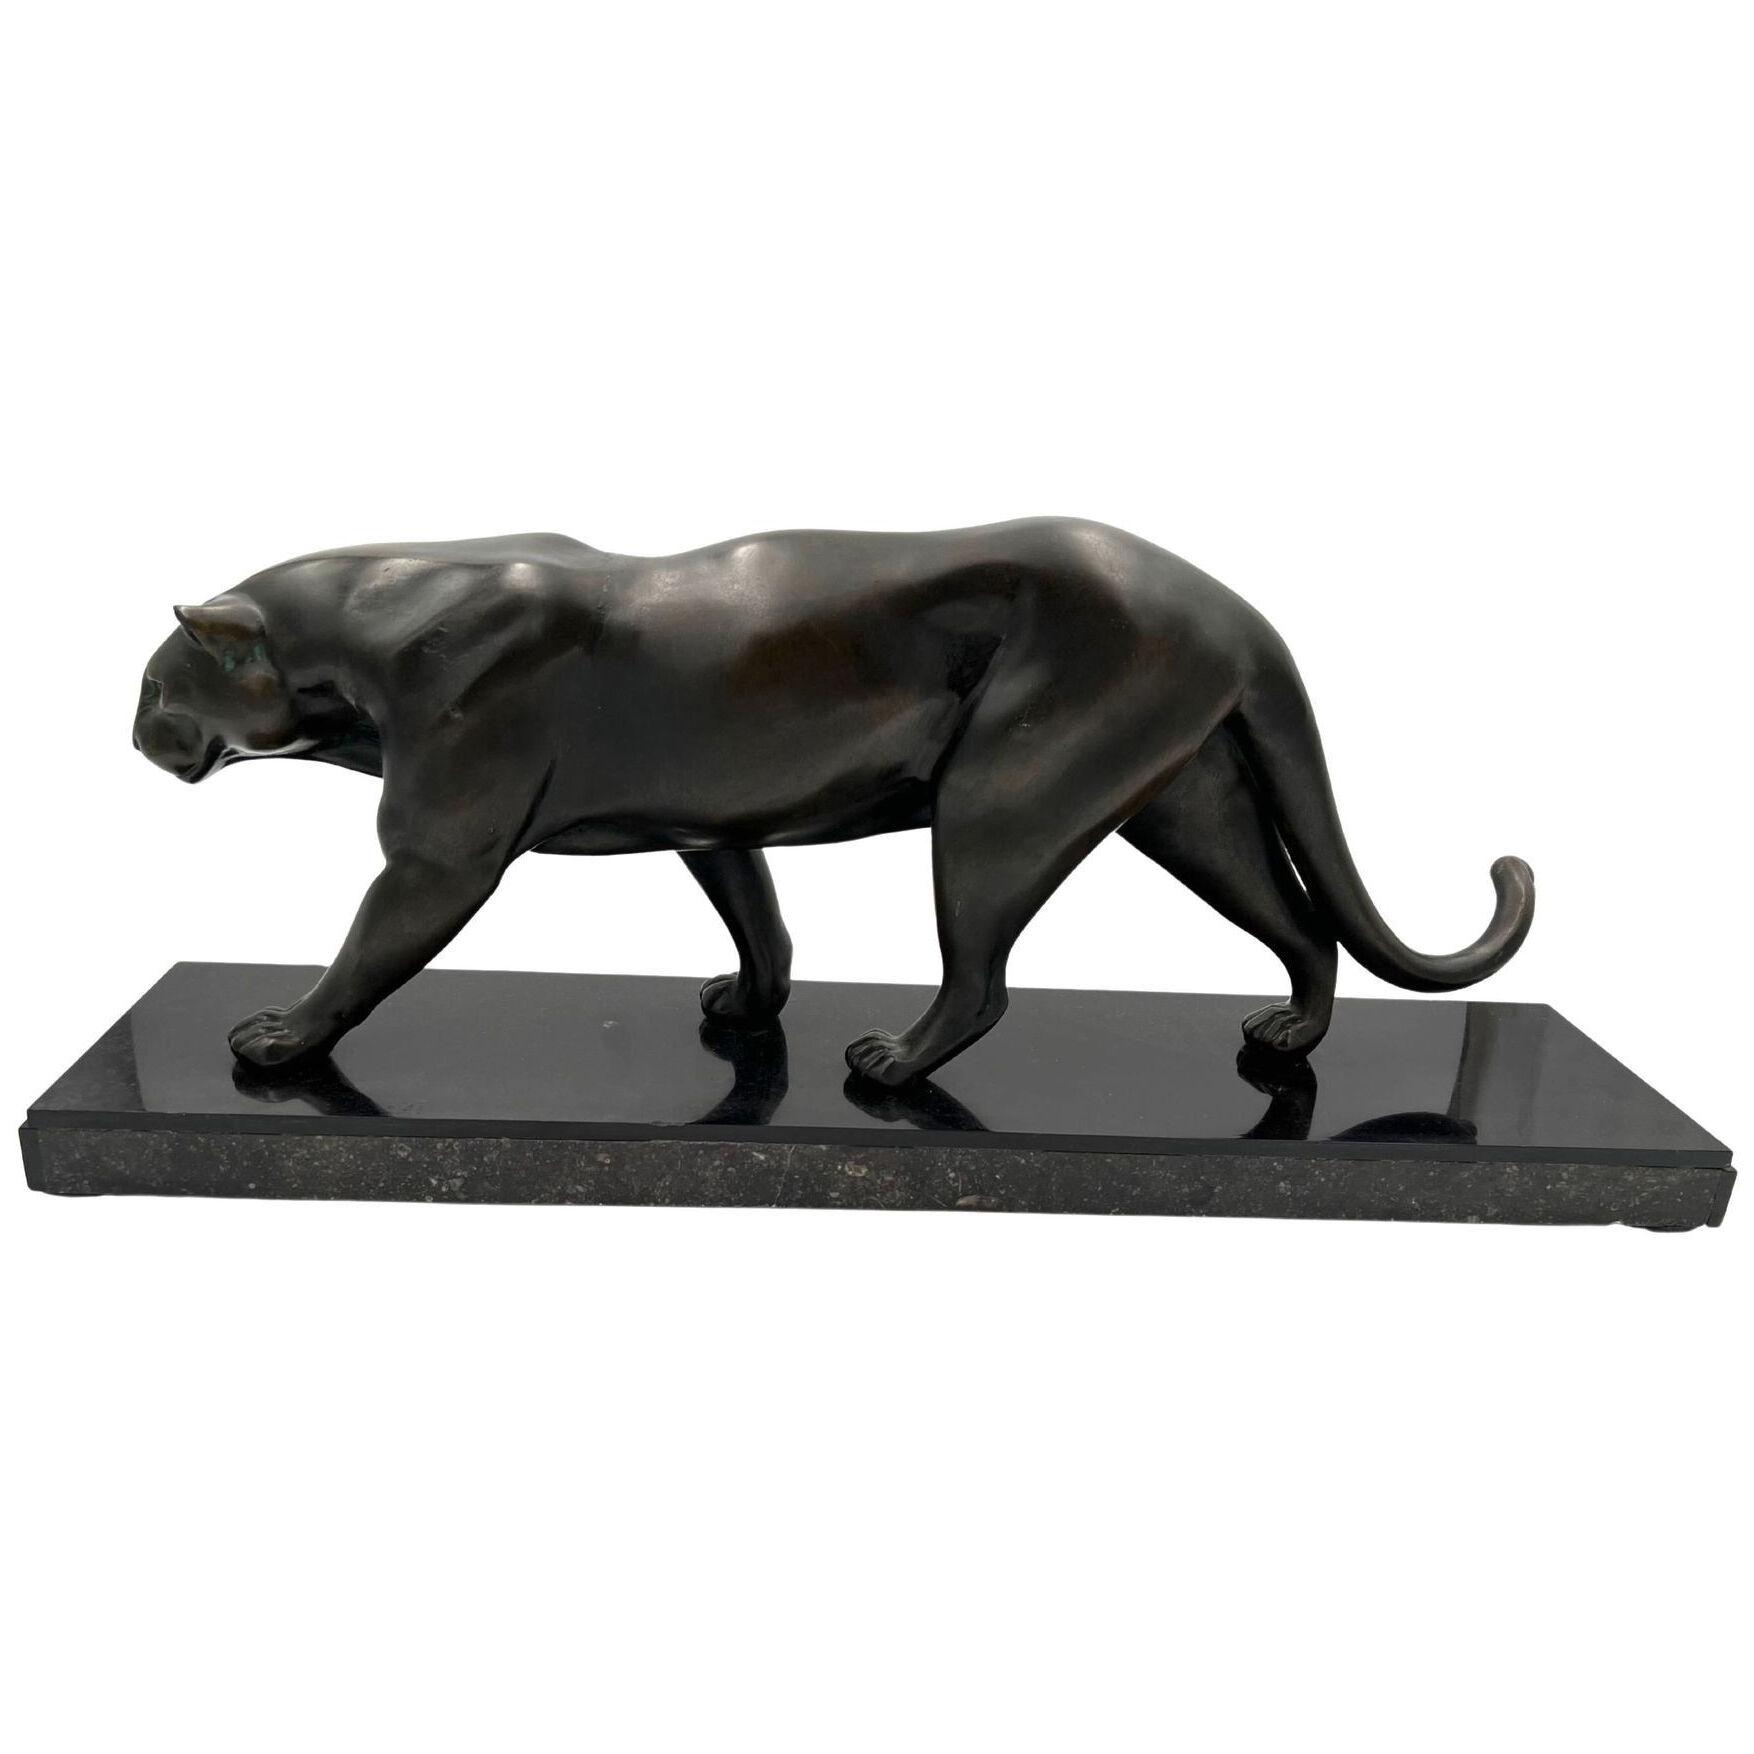 Large Art Deco Panther Sculpture by Rules, Bronze, Marble, France circa 1930